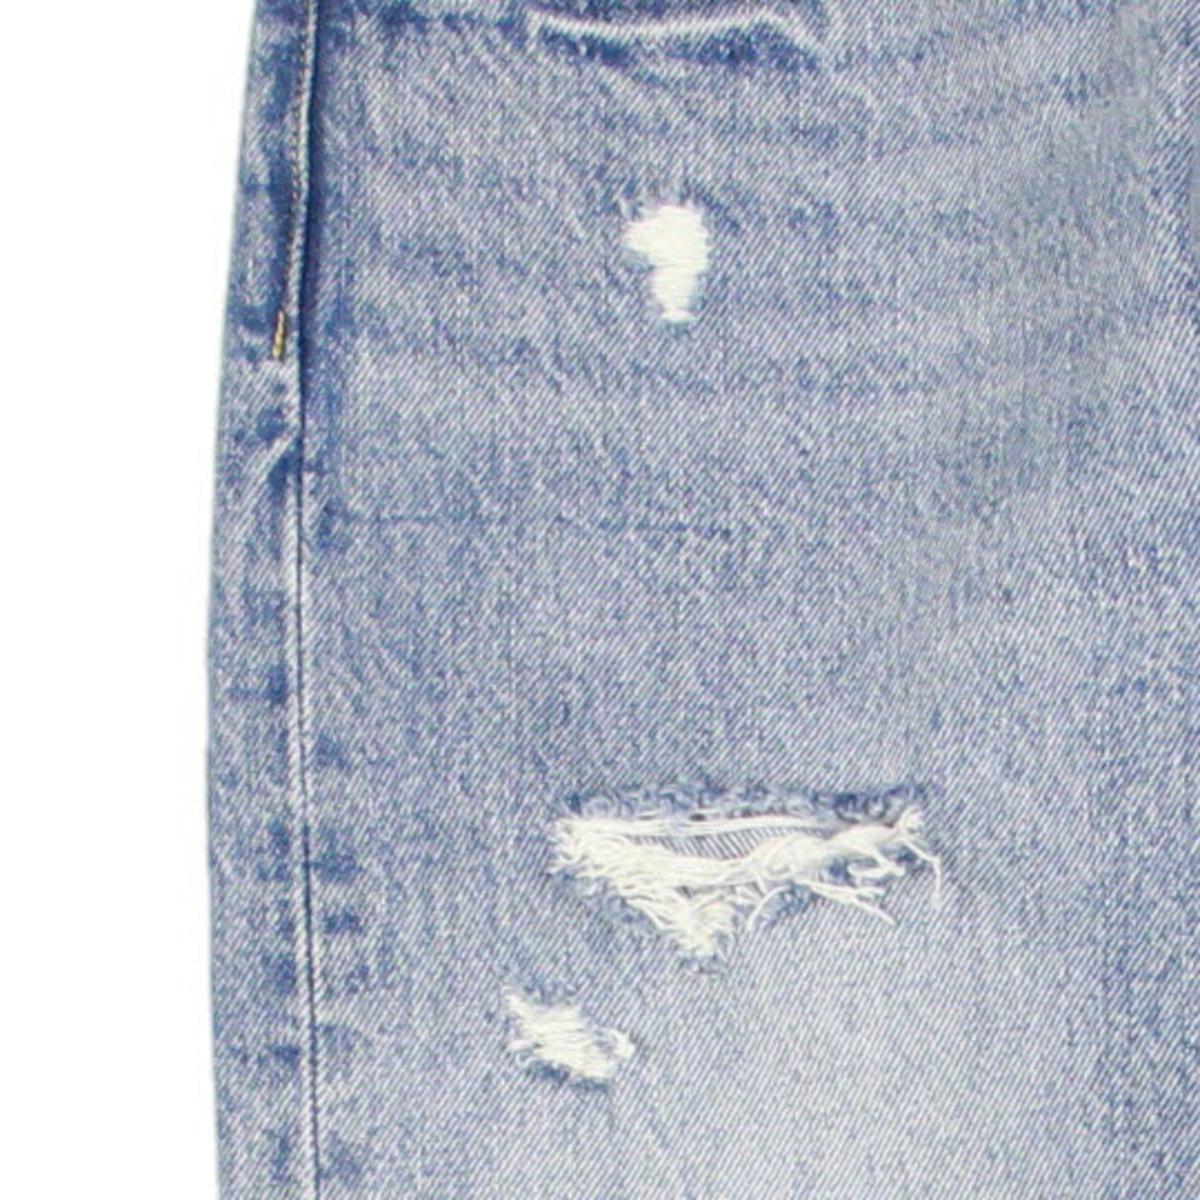 Levi's 501 Womens Destructed Button Fly Skinny Jeans